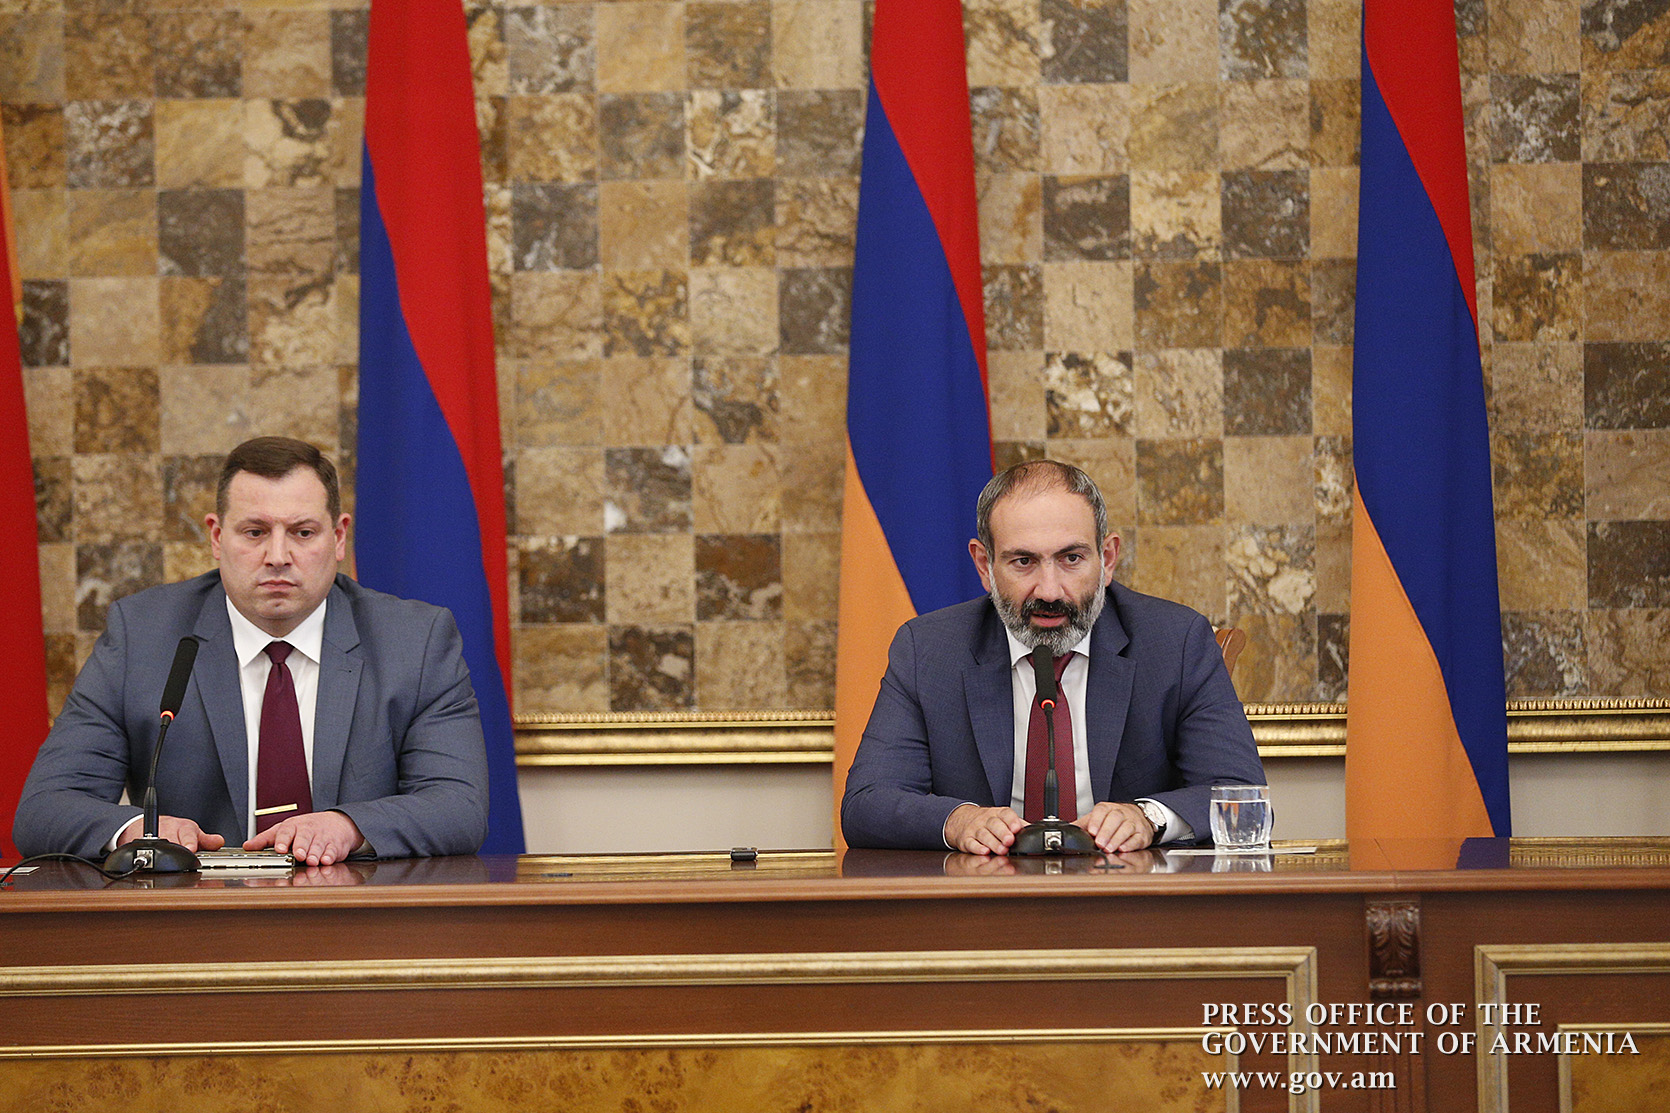 Prime Minister: ‘Our task is not to drive people into prison; our task is to enforce the rule of law in Armenia’